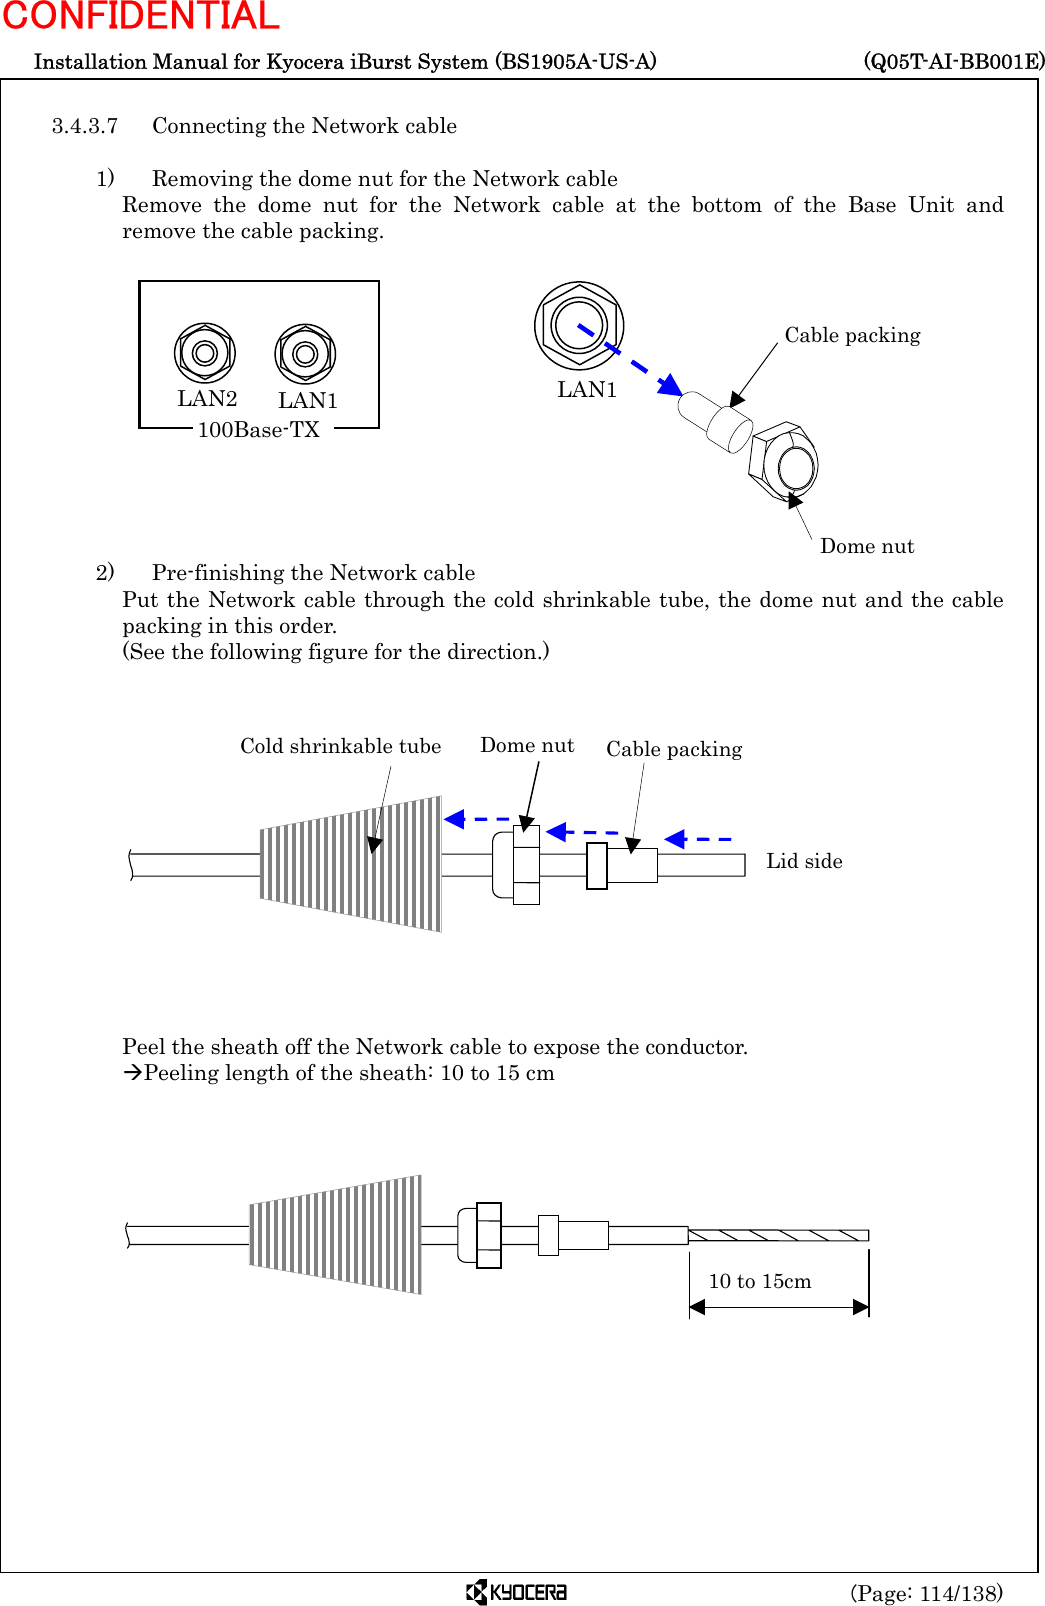  Installation Manual for Kyocera iBurst System (BS1905A-US-A)     (Q05T-AI-BB001E) (Page: 114/138) CONFIDENTIAL  3.4.3.7  Connecting the Network cable  1)    Removing the dome nut for the Network cable Remove the dome nut for the Network cable at the bottom of the Base Unit and remove the cable packing.             2)    Pre-finishing the Network cable Put the Network cable through the cold shrinkable tube, the dome nut and the cable packing in this order.   (See the following figure for the direction.)               Peel the sheath off the Network cable to expose the conductor. ÆPeeling length of the sheath: 10 to 15 cm                   Cable packing Dome nut LAN1 10 to 15cm Cold shrinkable tube Dome nut  Cable packing Lid side LAN2  LAN1 100Base-TX 